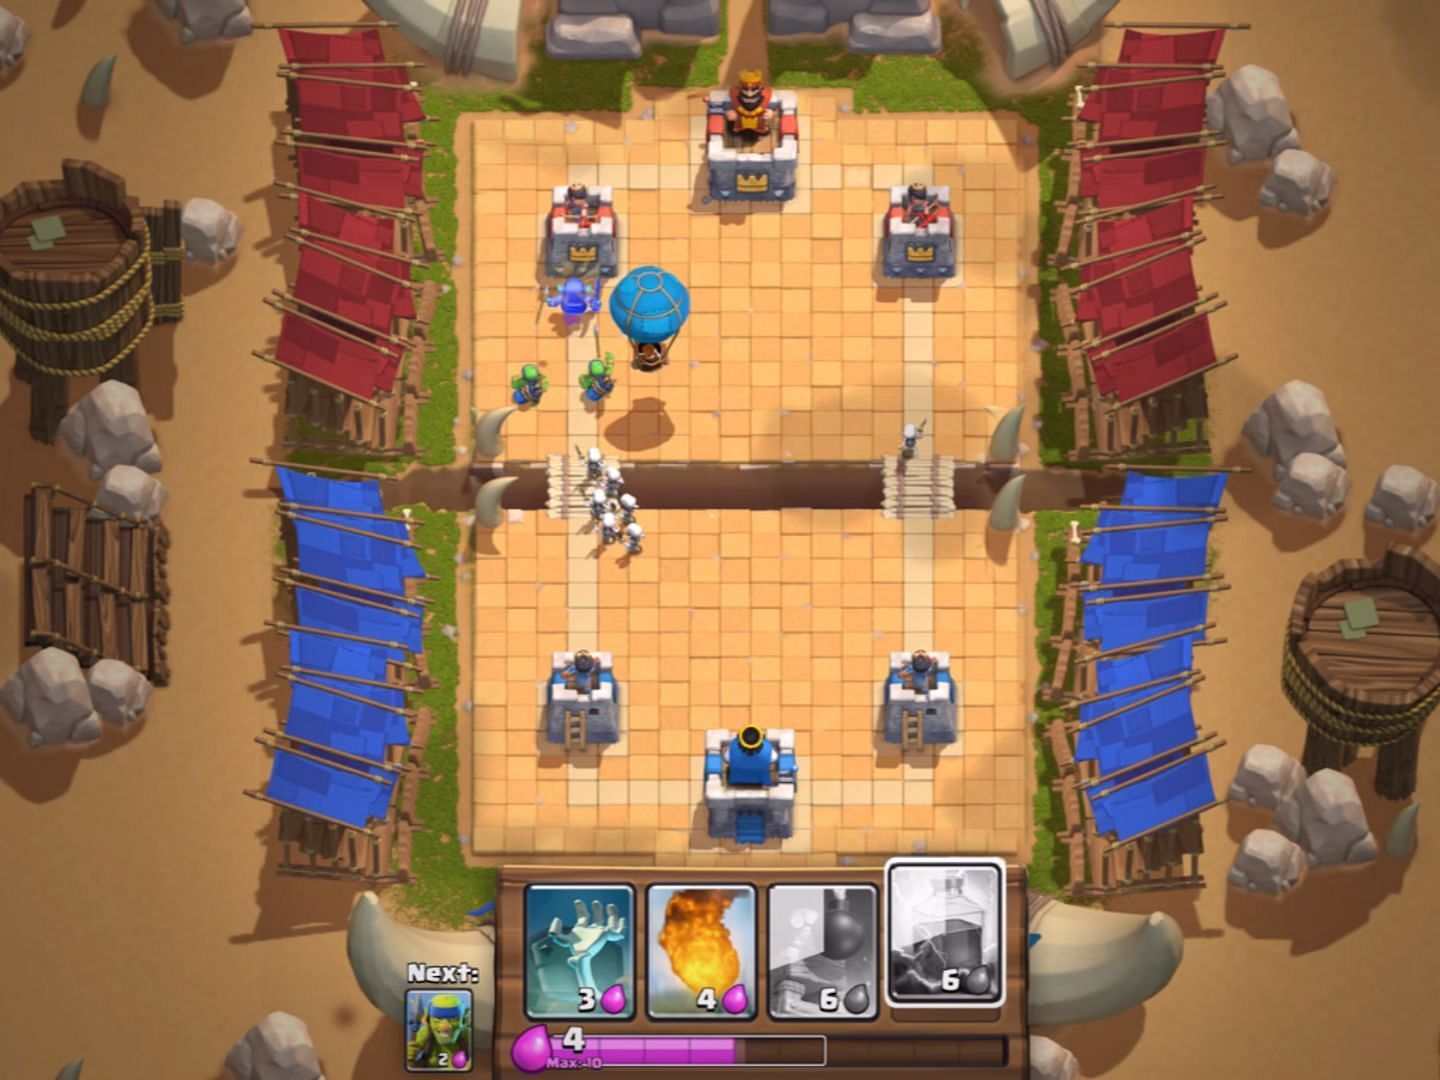 Battle Arena in CR (Image via Supercell)